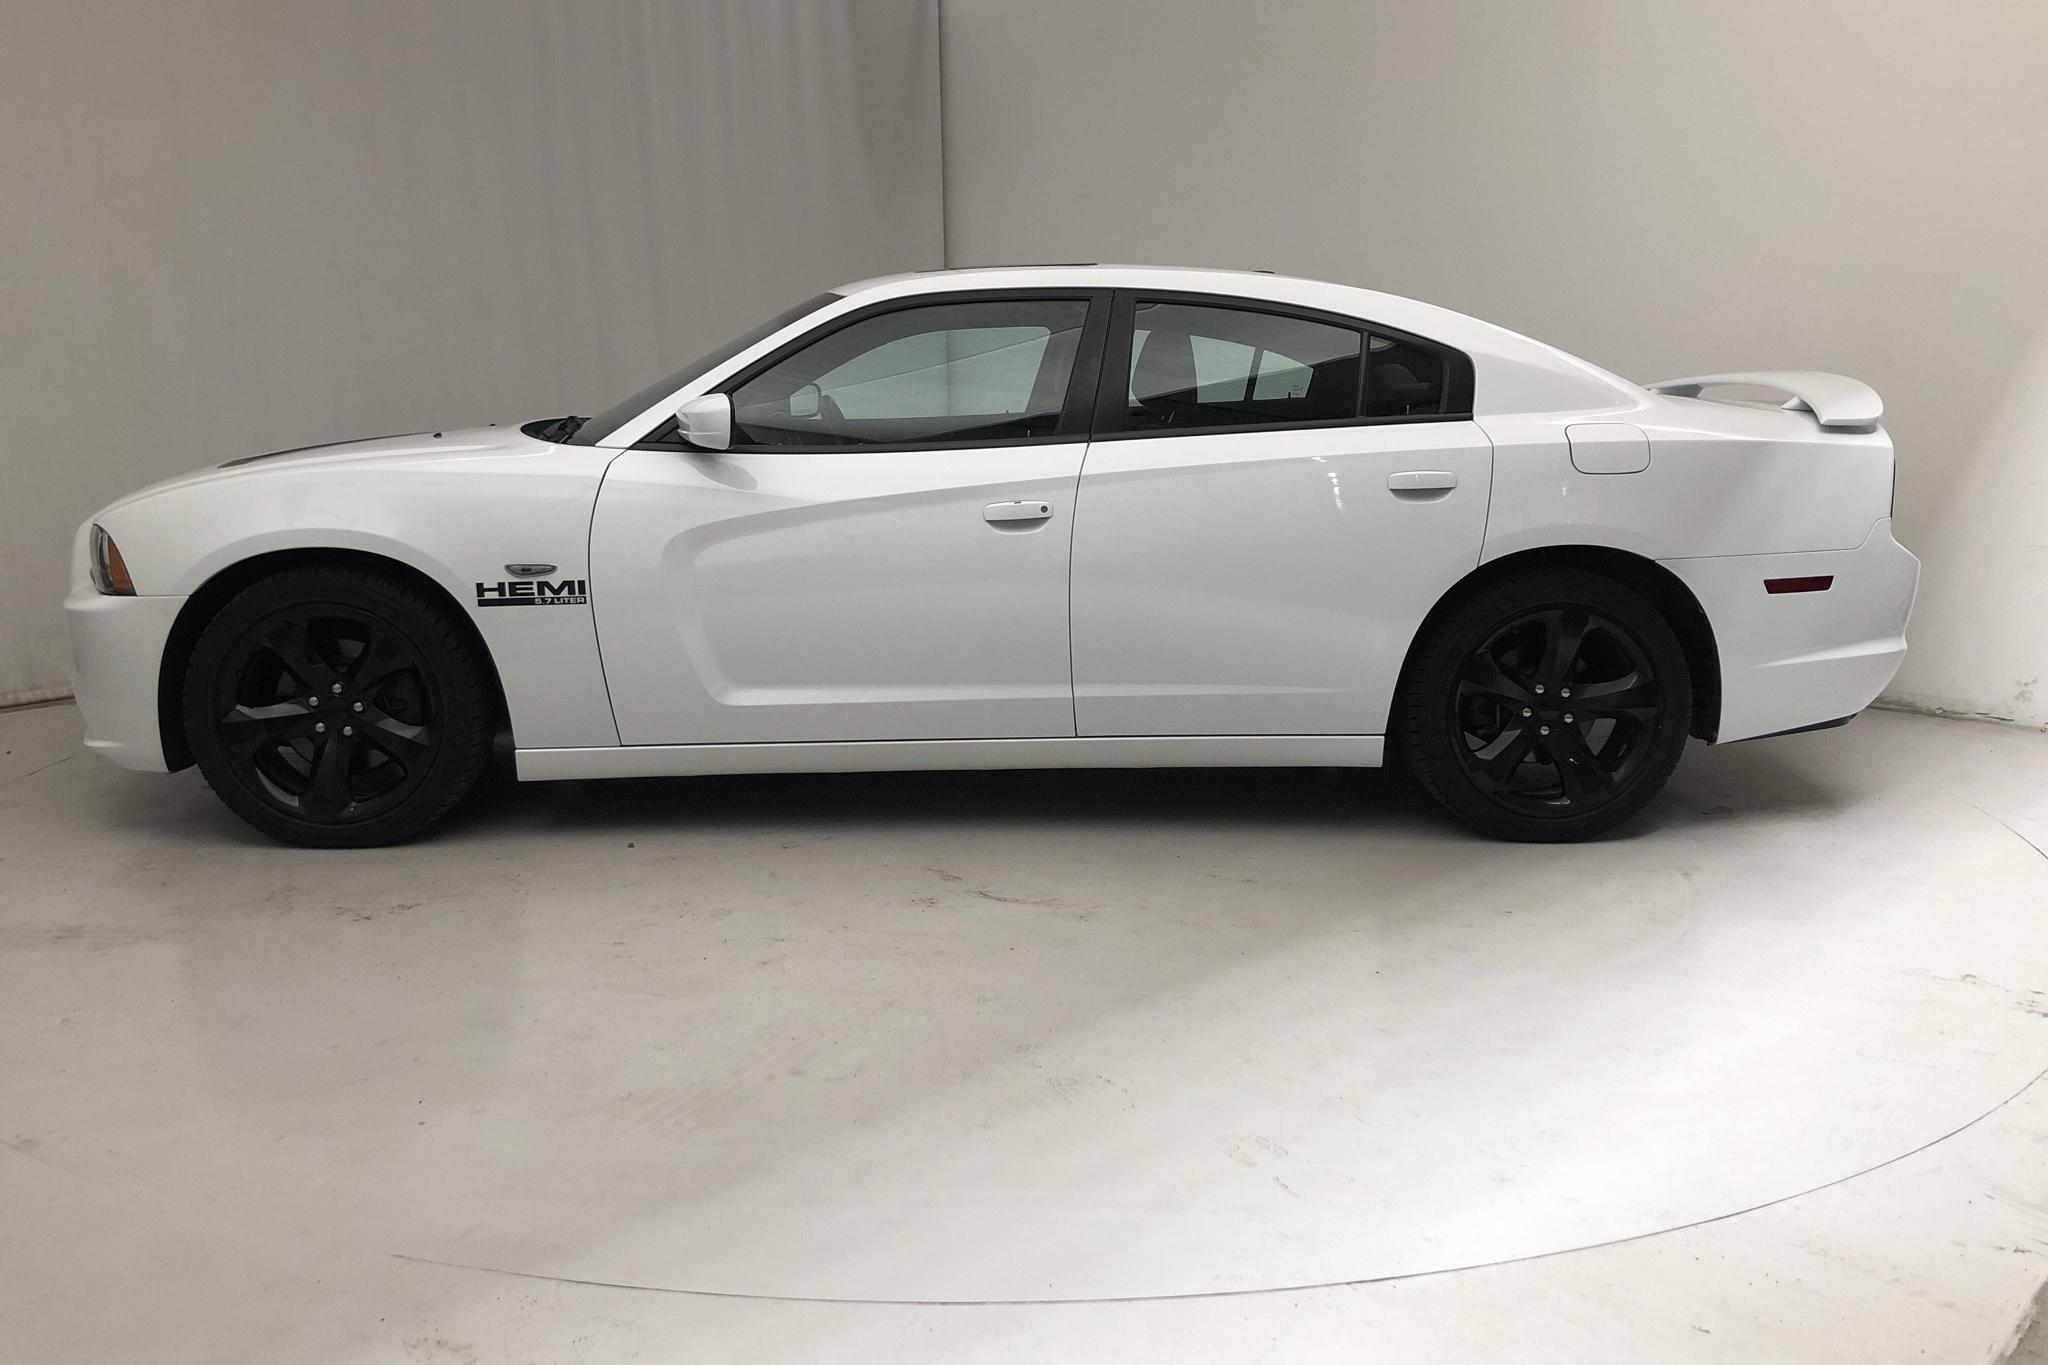 Dodge Charger 5.7 V8 (375hk) - 74 770 km - Automatic - white - 2014